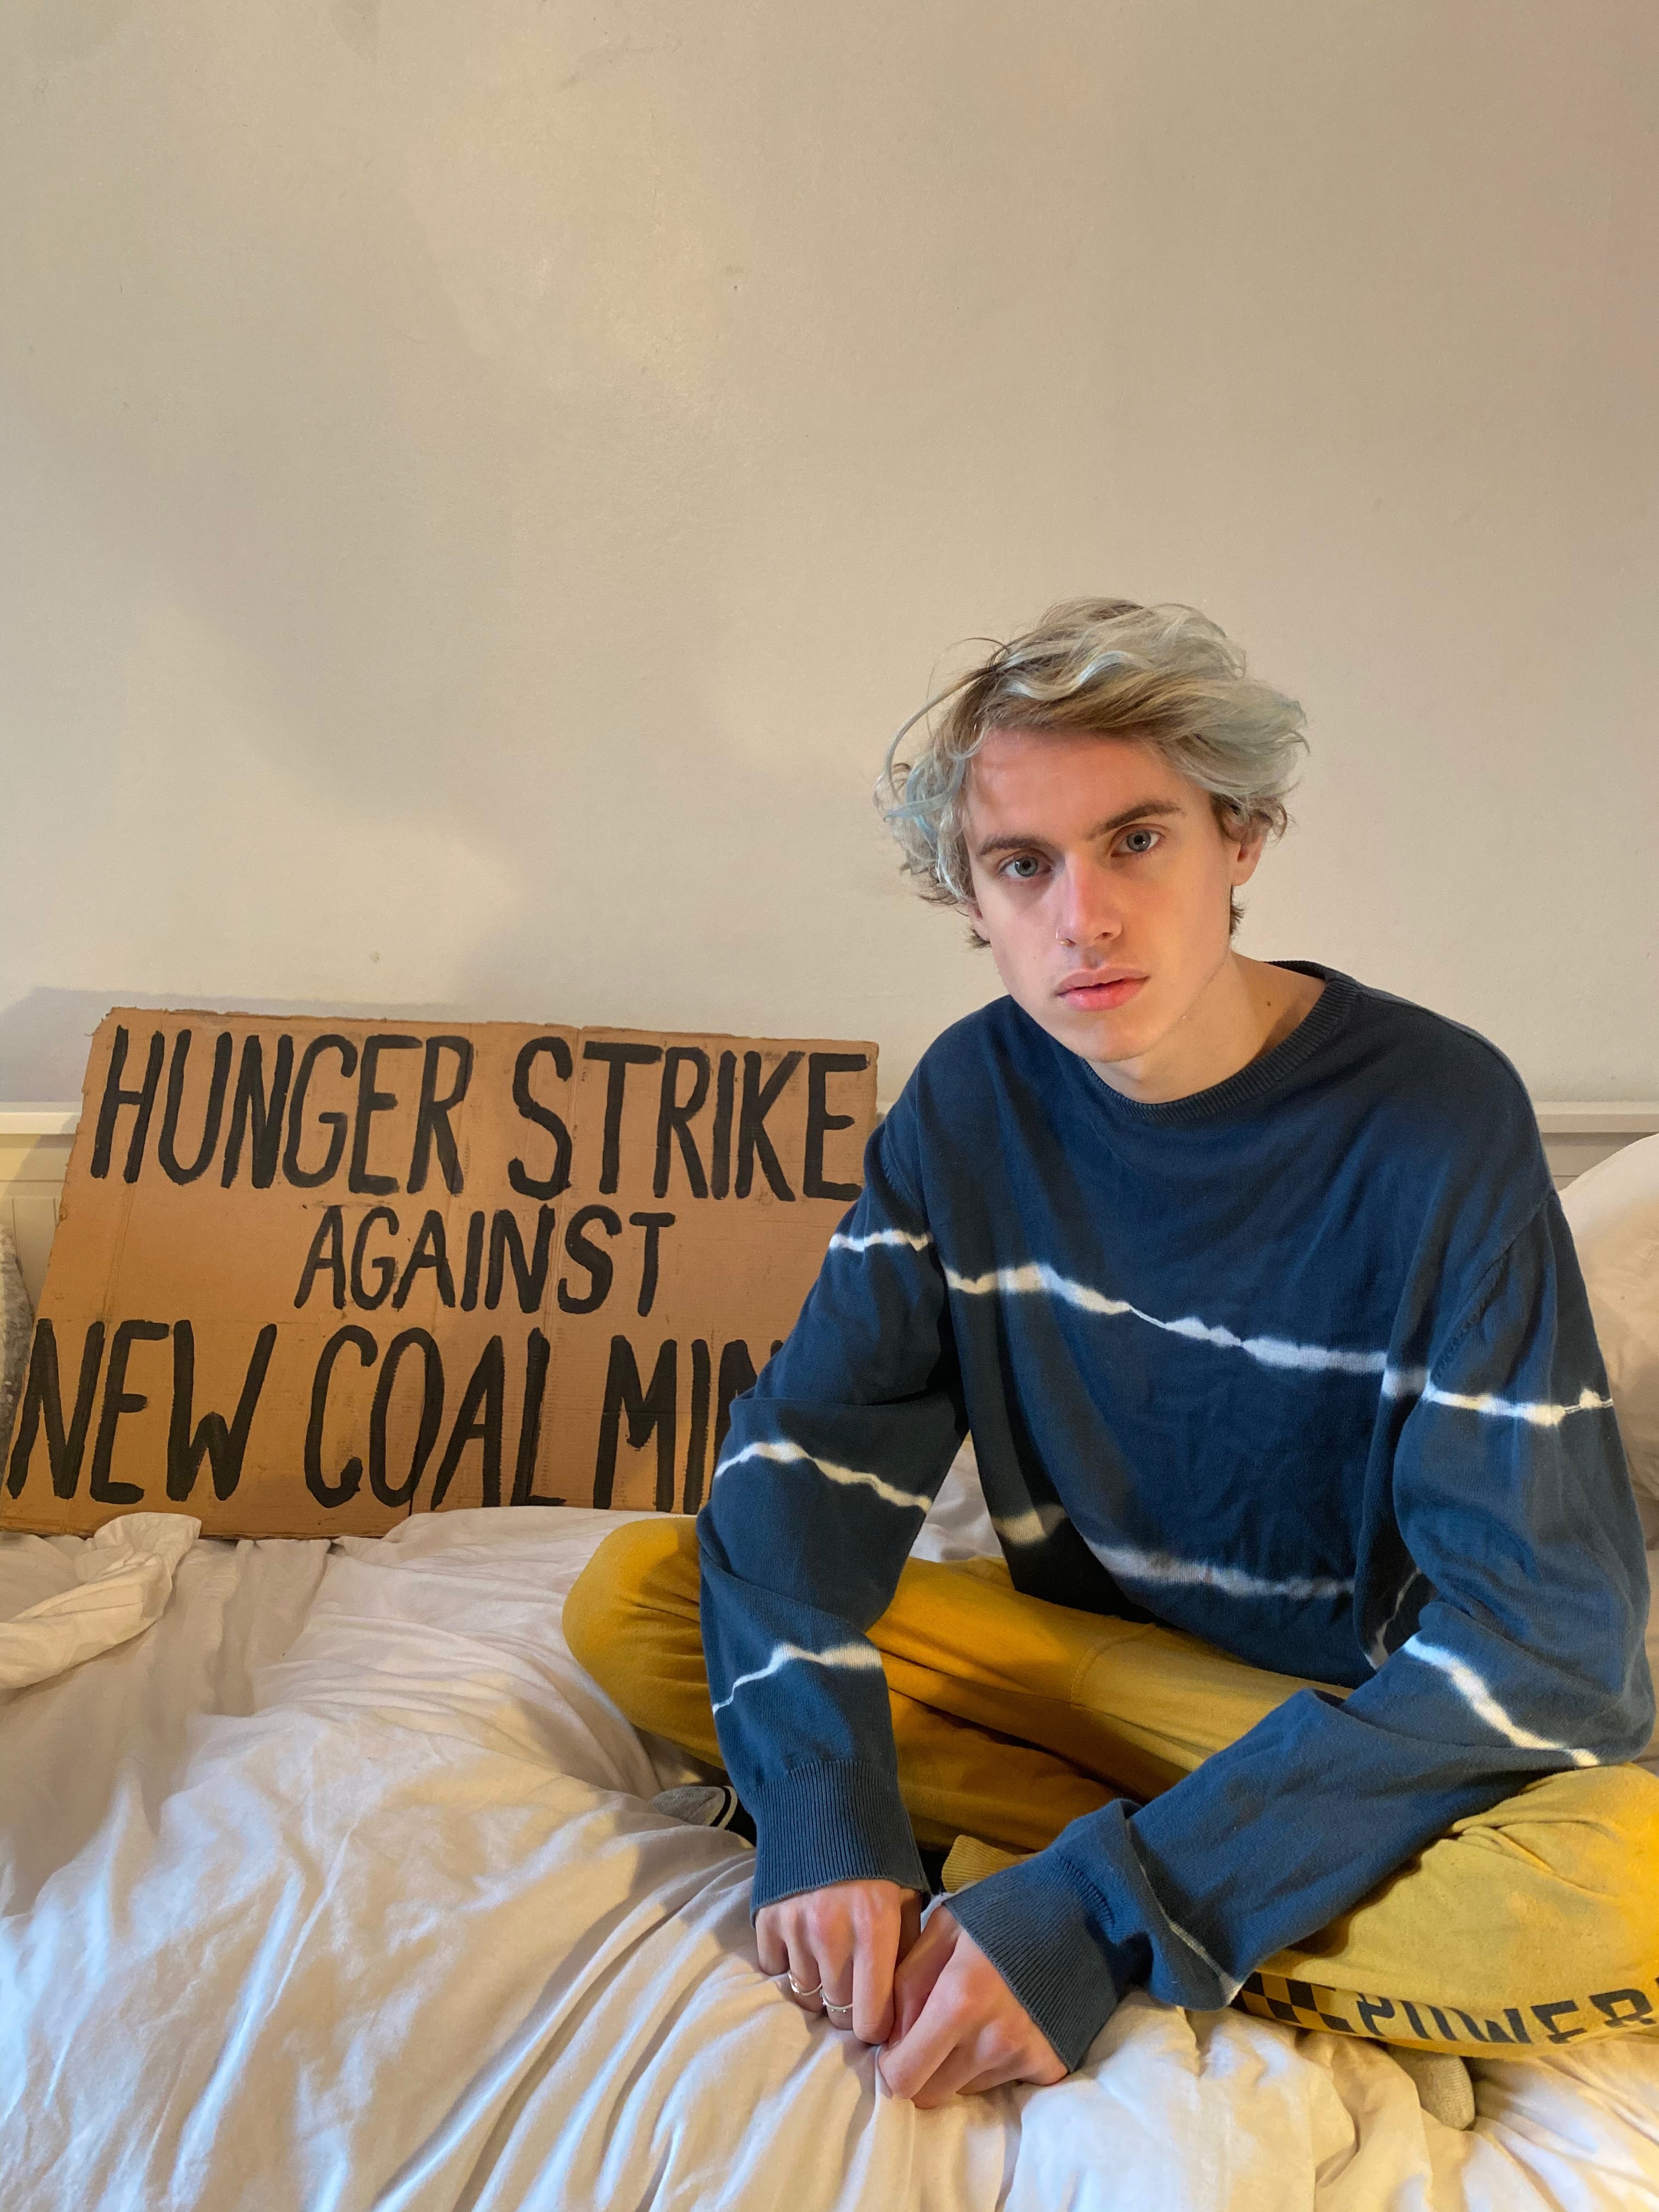 Mckenzie-Jackson is known for his hunger strike against a planned demolition of coal mines in west Cumbria